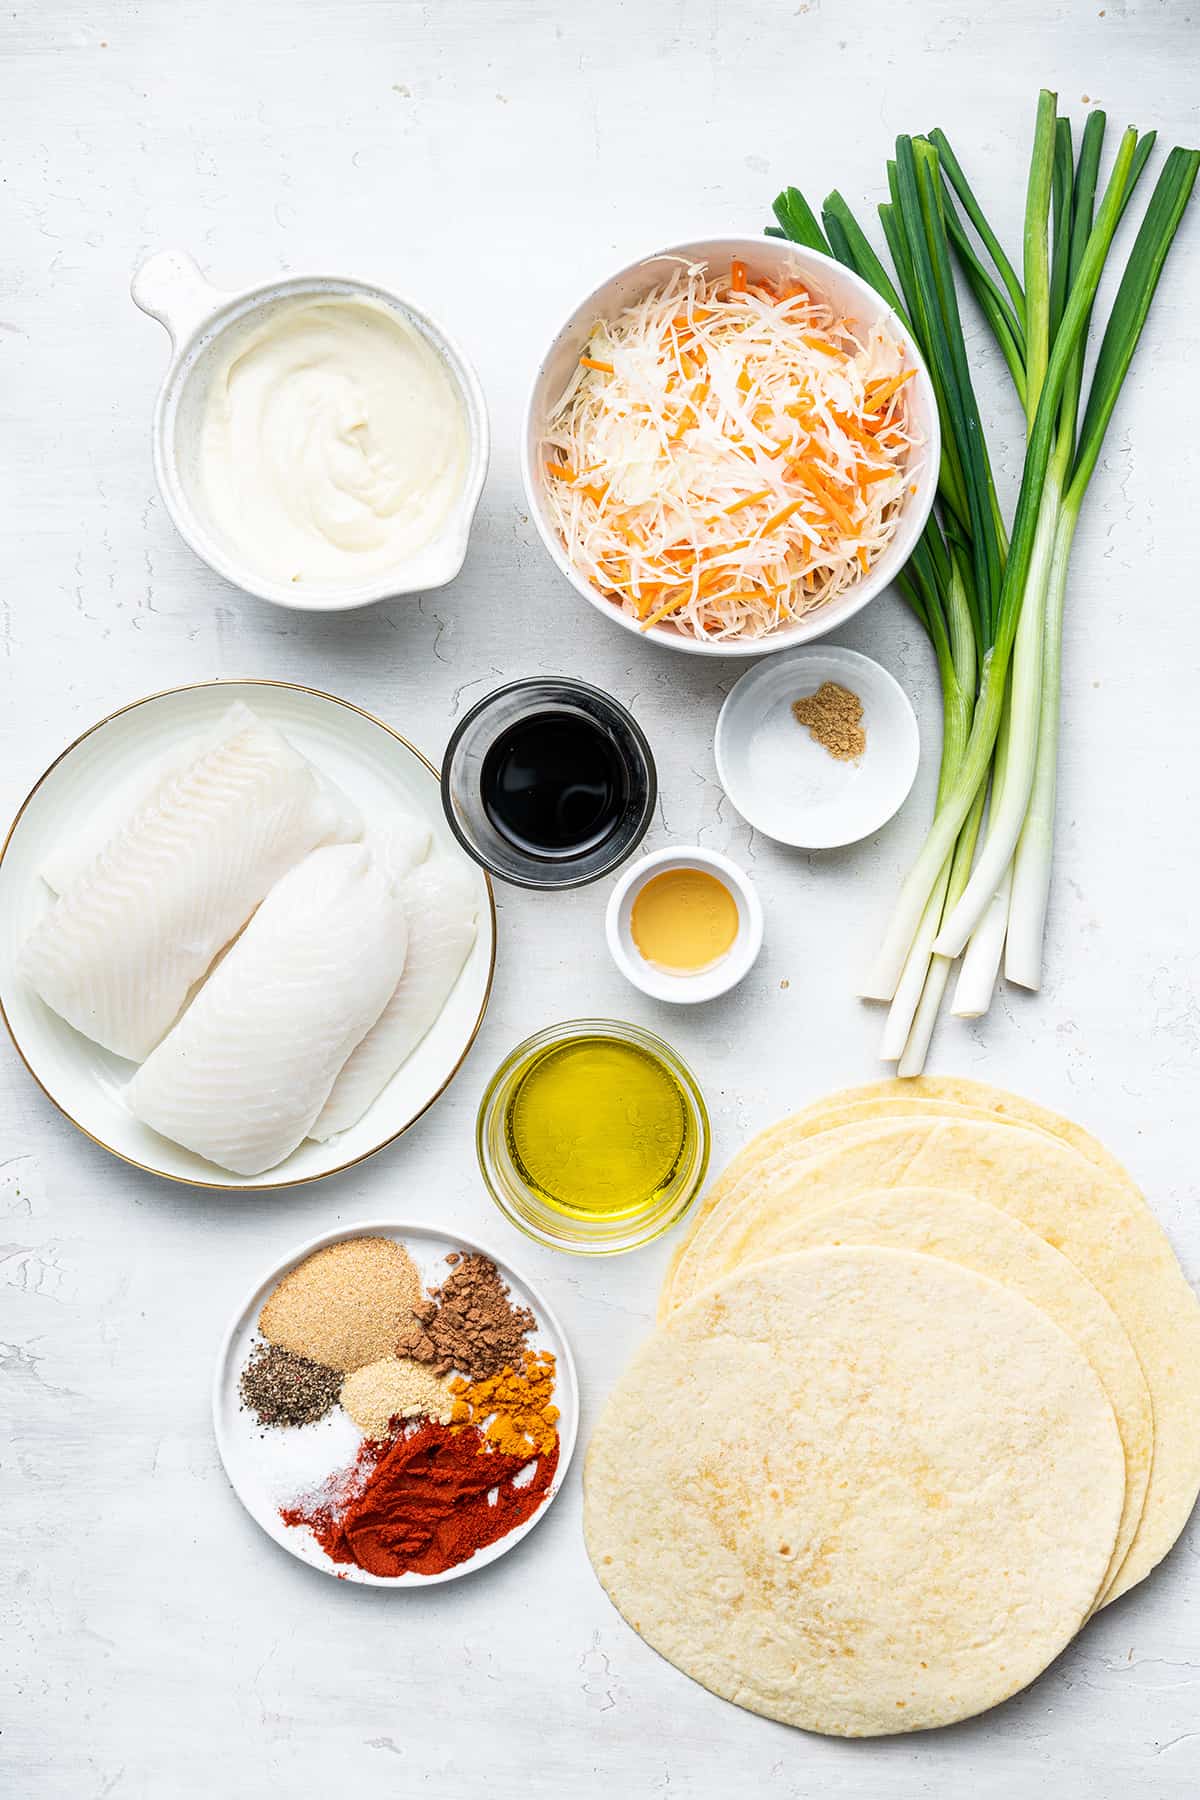 Overhead view of the ingredients for blackened fish tacos: a plate of mahi-mahi, a bowl of shredded carrots and cabbage, a bowl of dressing, a bowl of oil, a bowl of spices, some scallions, and a stack of tortillas